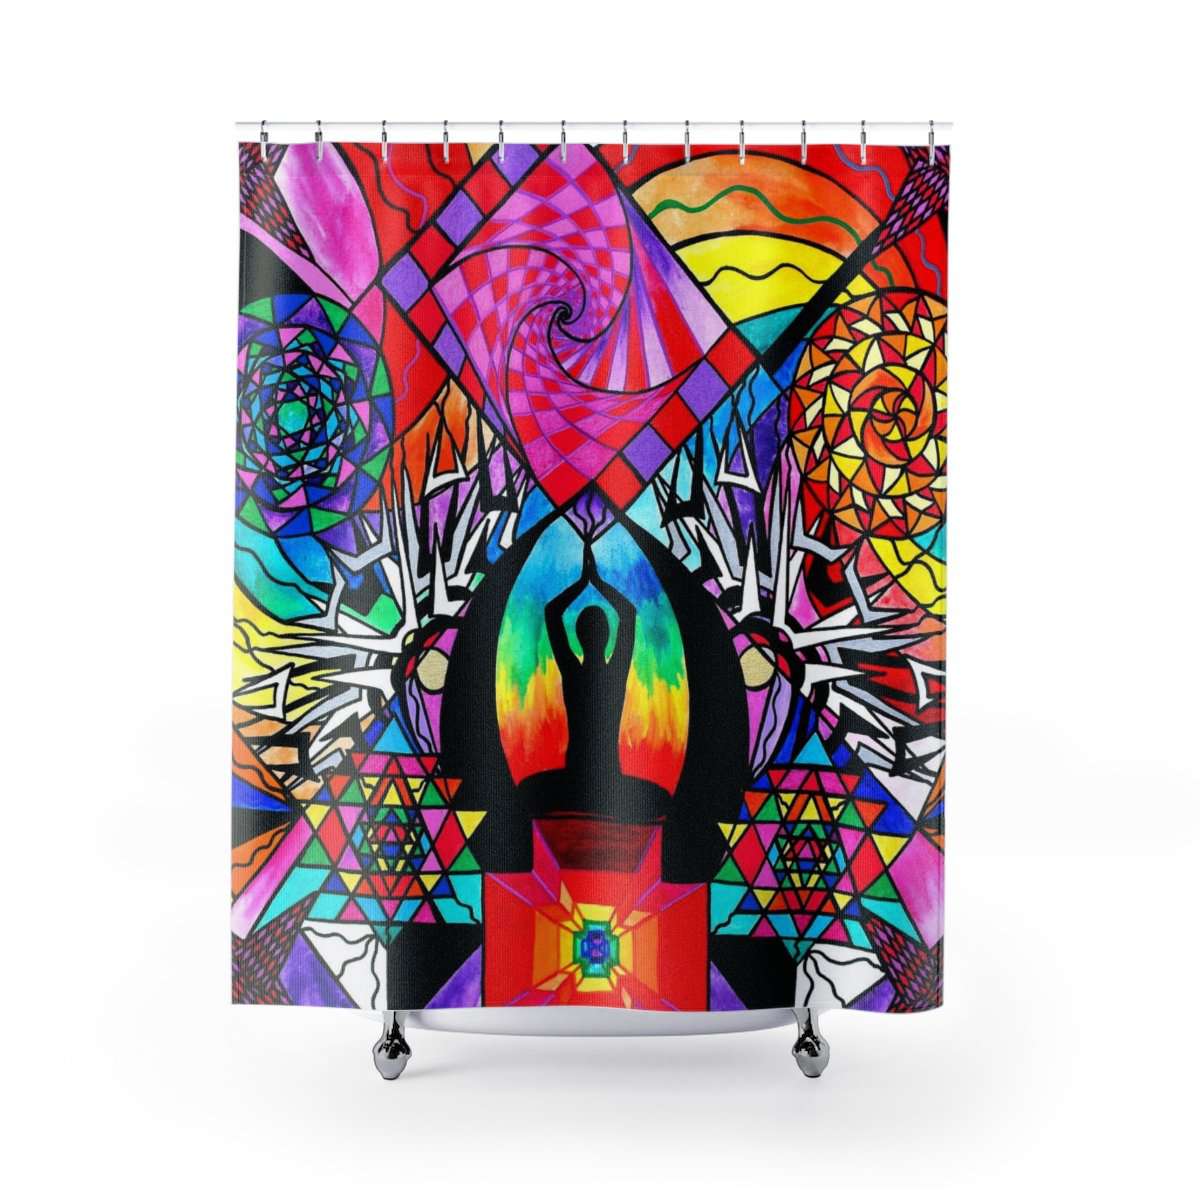 a-great-place-to-buy-meditation-aid-shower-curtains-online-now_0.jpg